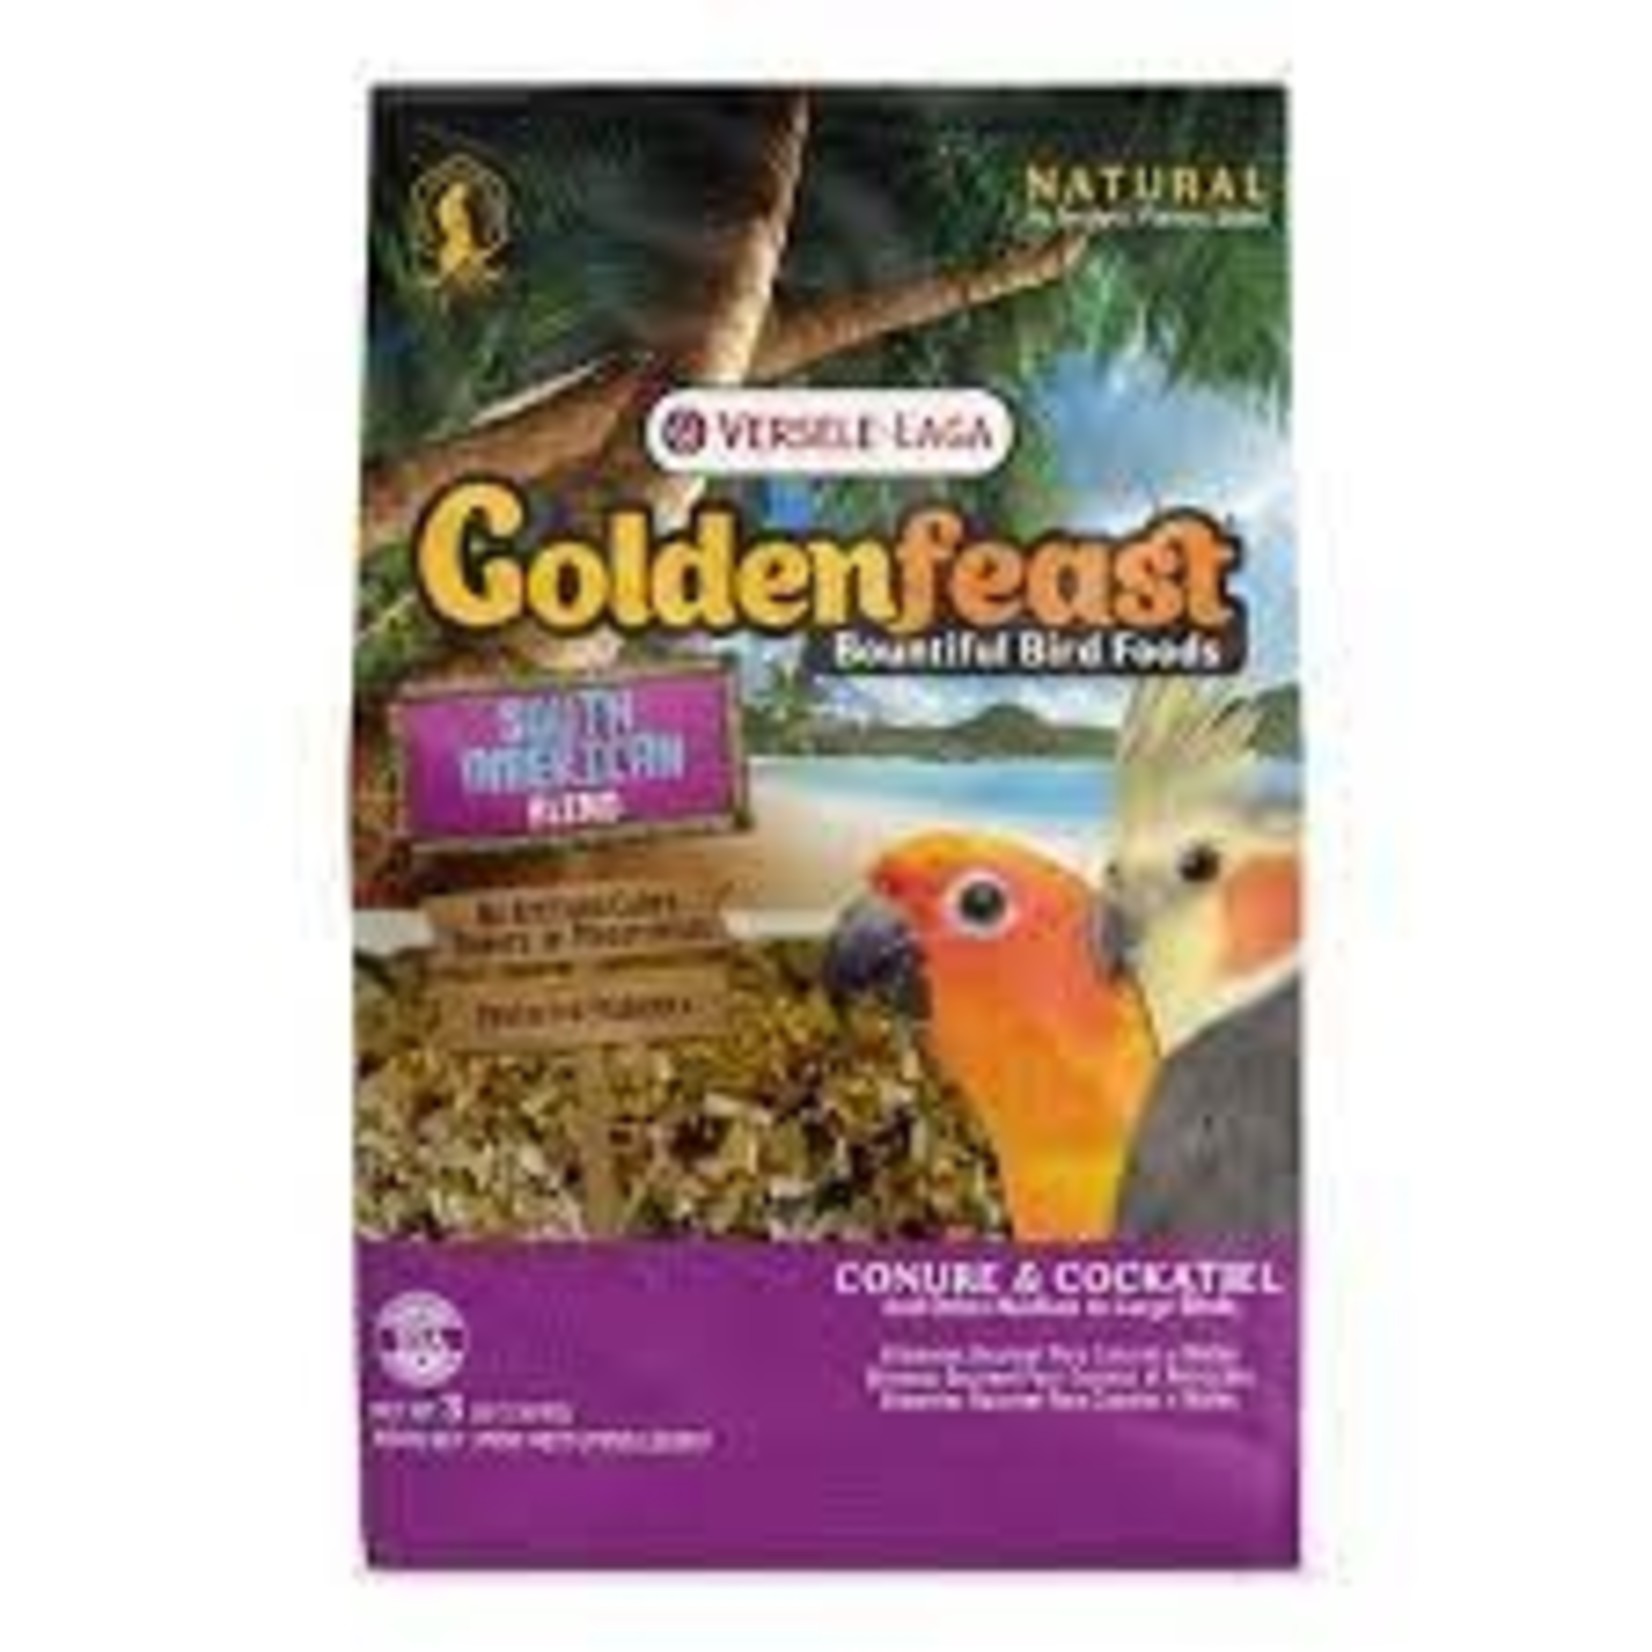 Goldenfeast GOLDENFEAST SOUTH AMERICAN BLEND 3 LB